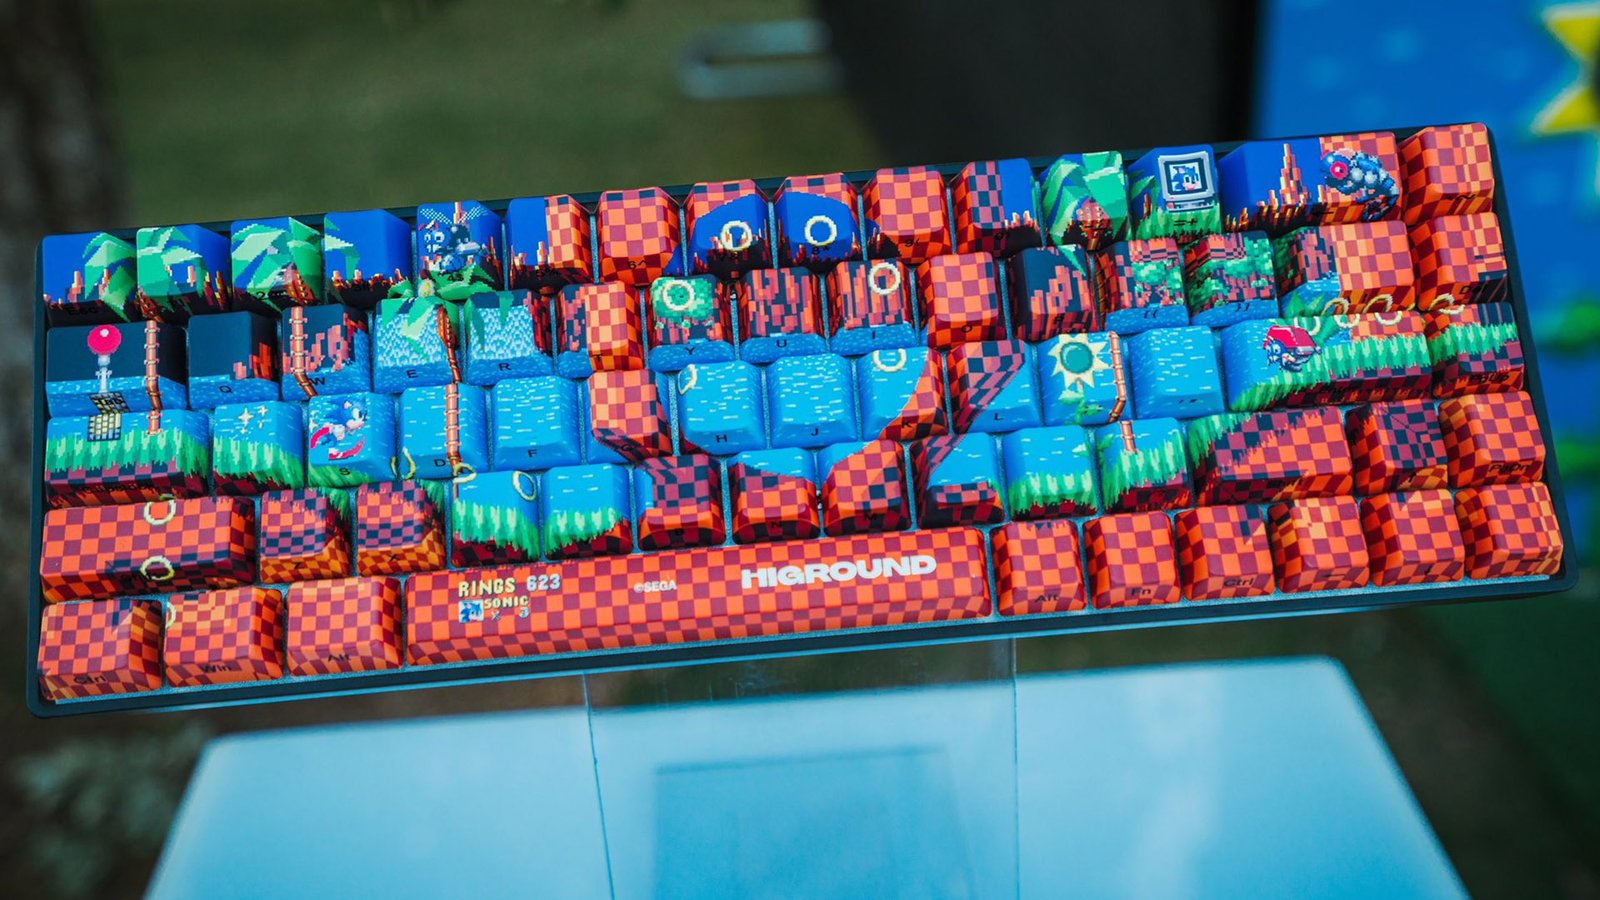 These Sonic the Hedgehog mechanical keyboards gotta form hastily